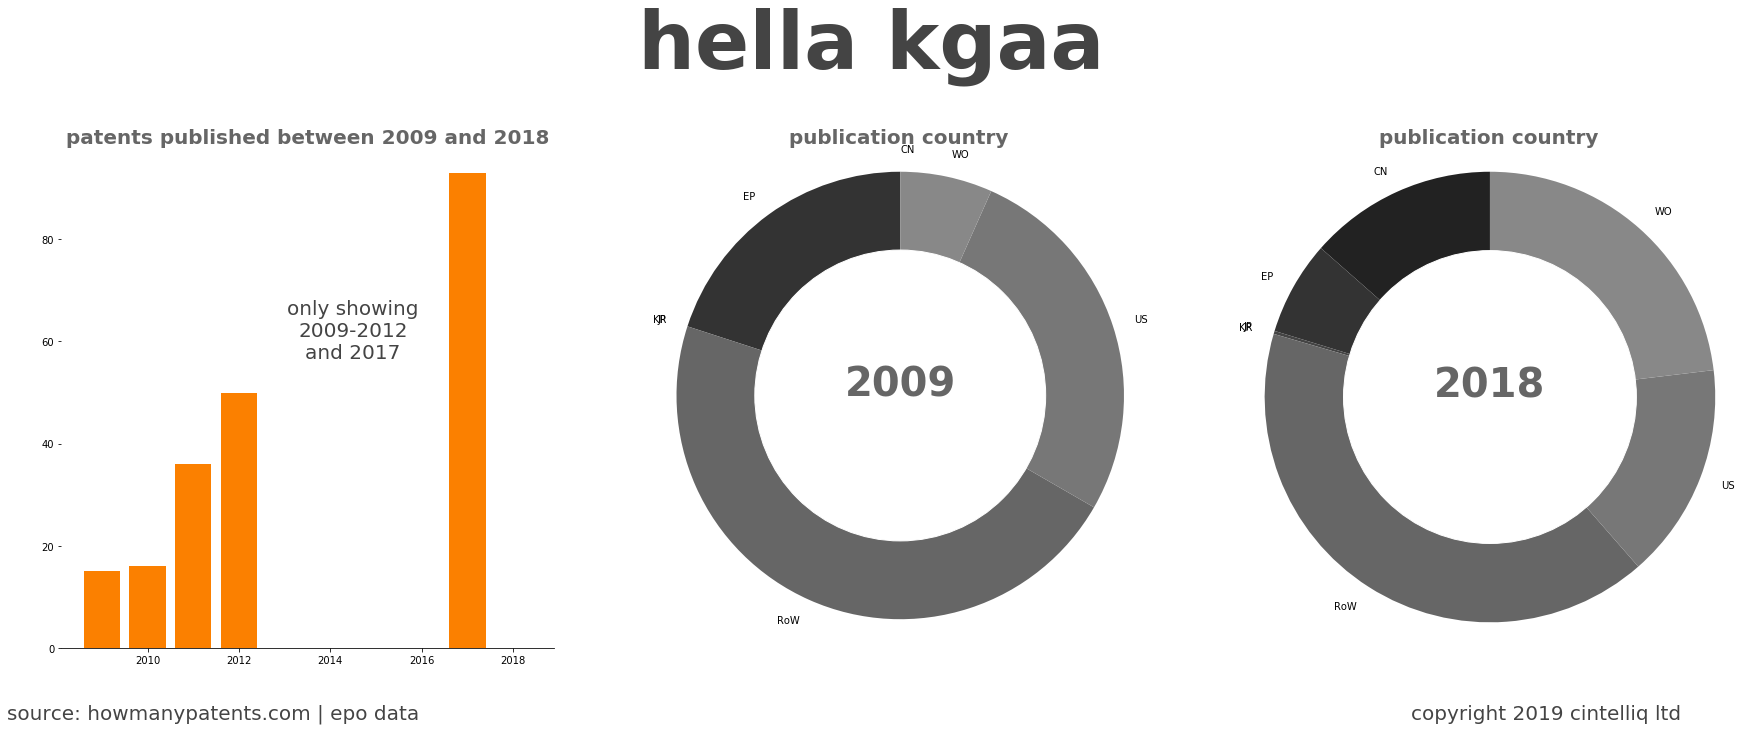 summary of patents for Hella Kgaa